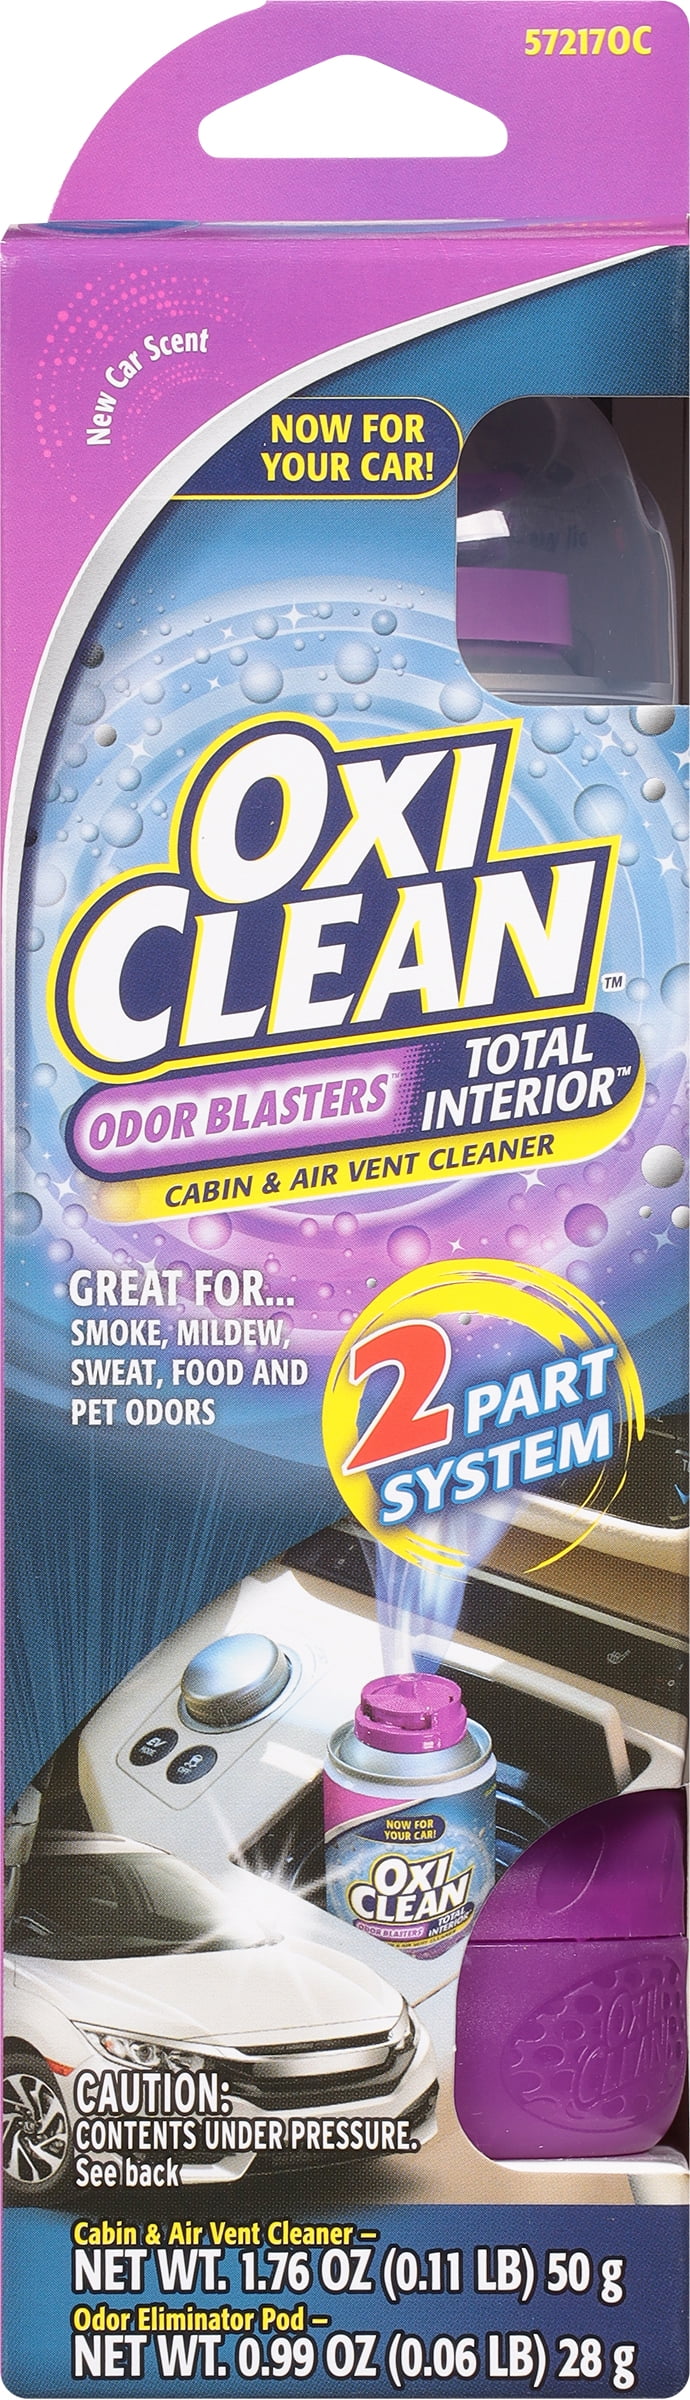 OxiClean Total Interior Cabin & Air Vent Cleaner 3.38 oz 57217OC